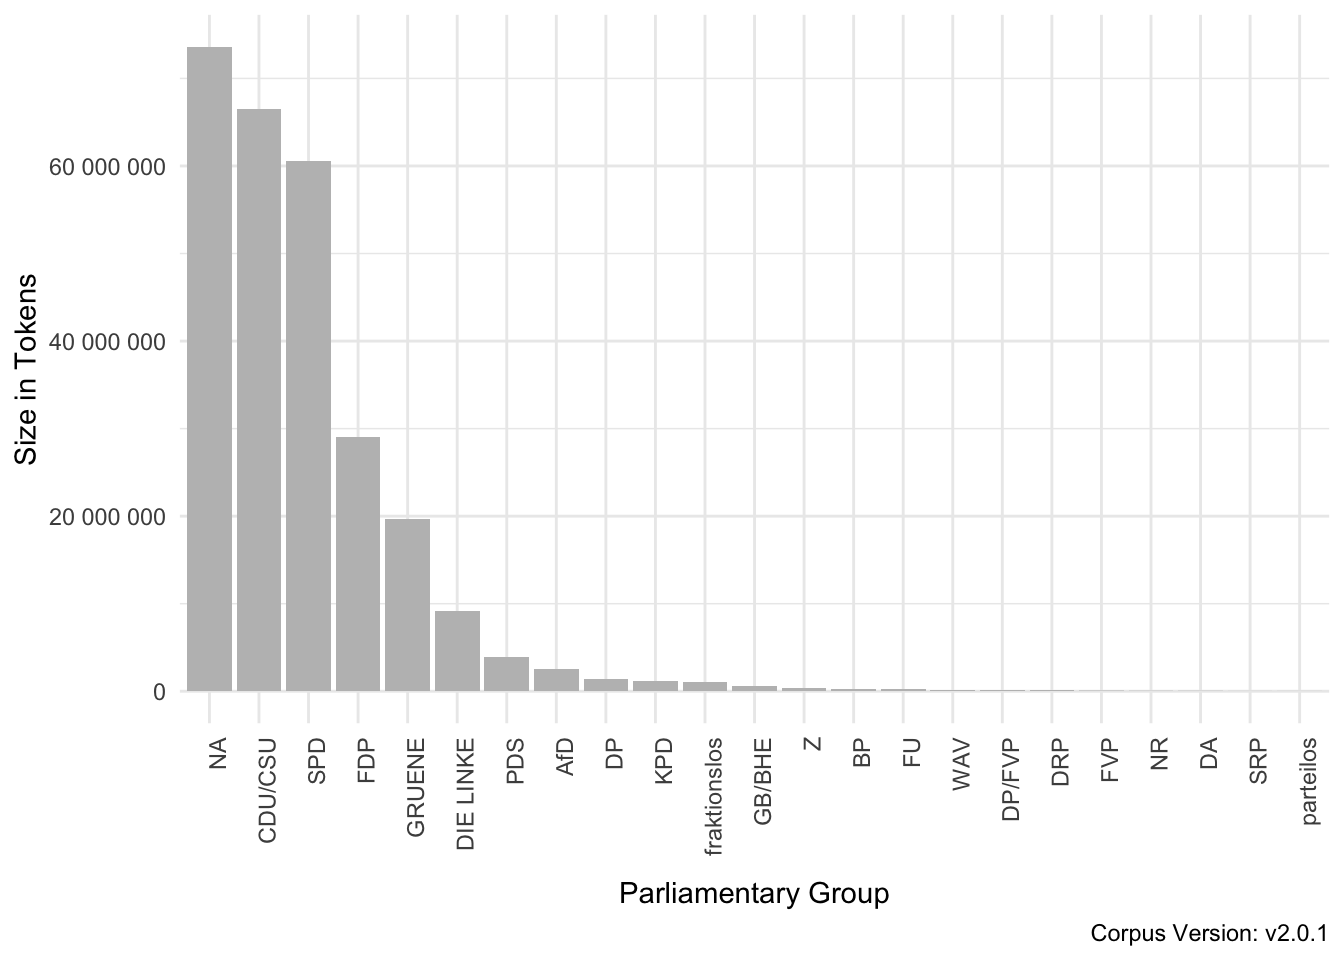 Number of Tokens per Parliamentary Group in the GermaParl corpus